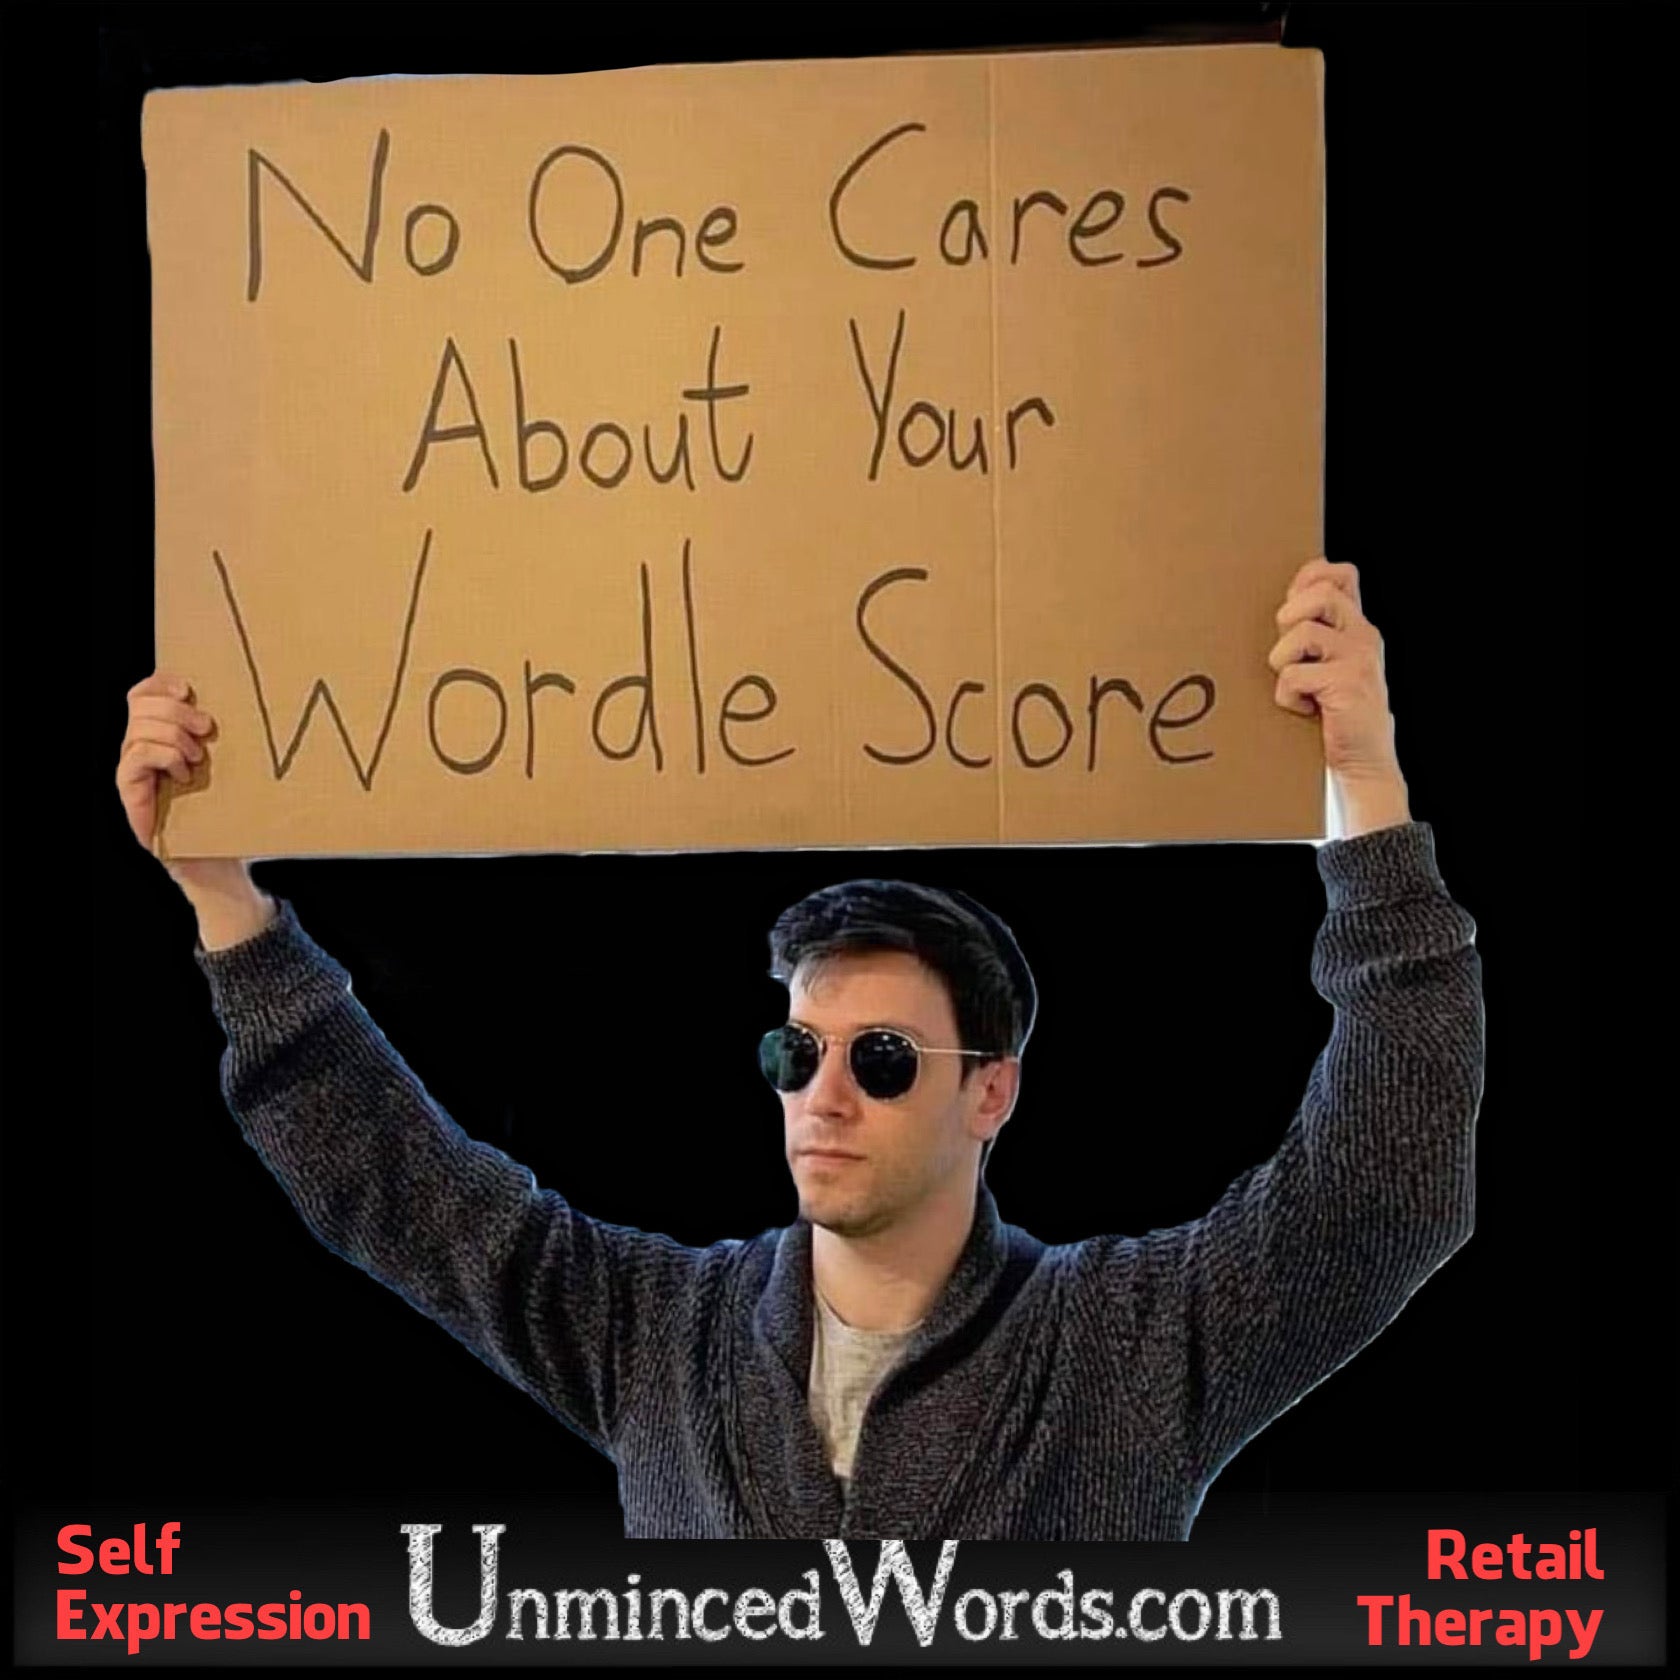 Nobody cares about your Wordle score